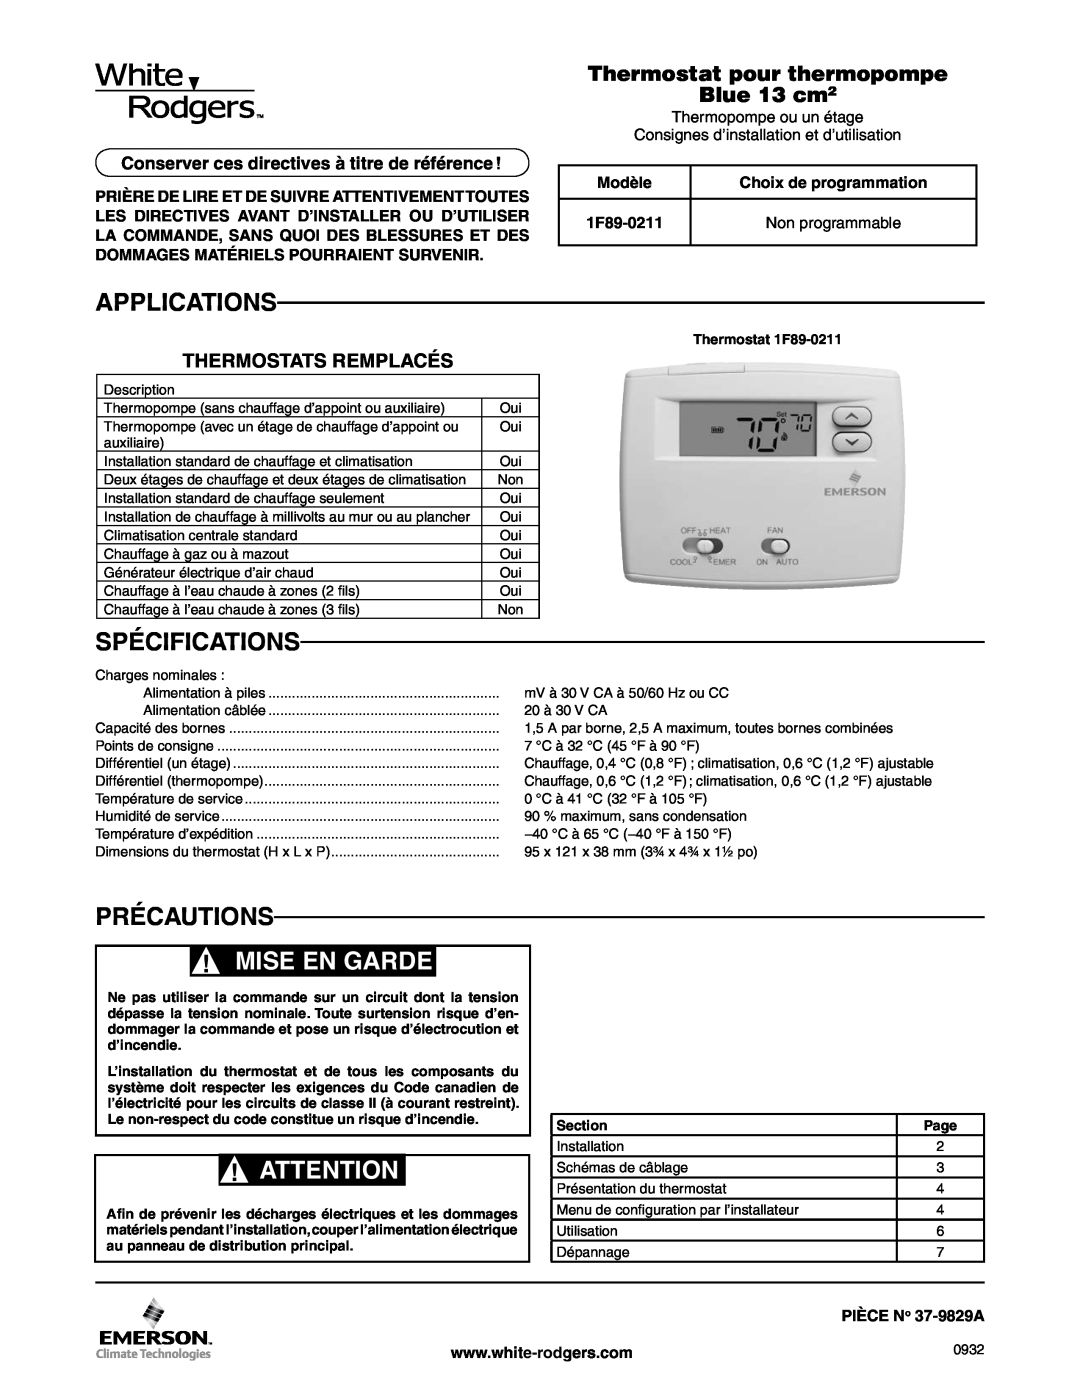 White Rodgers 1F89-0211 specifications Applications, Specifications, Precautions, Blue 2” Heat Pump Thermostat 